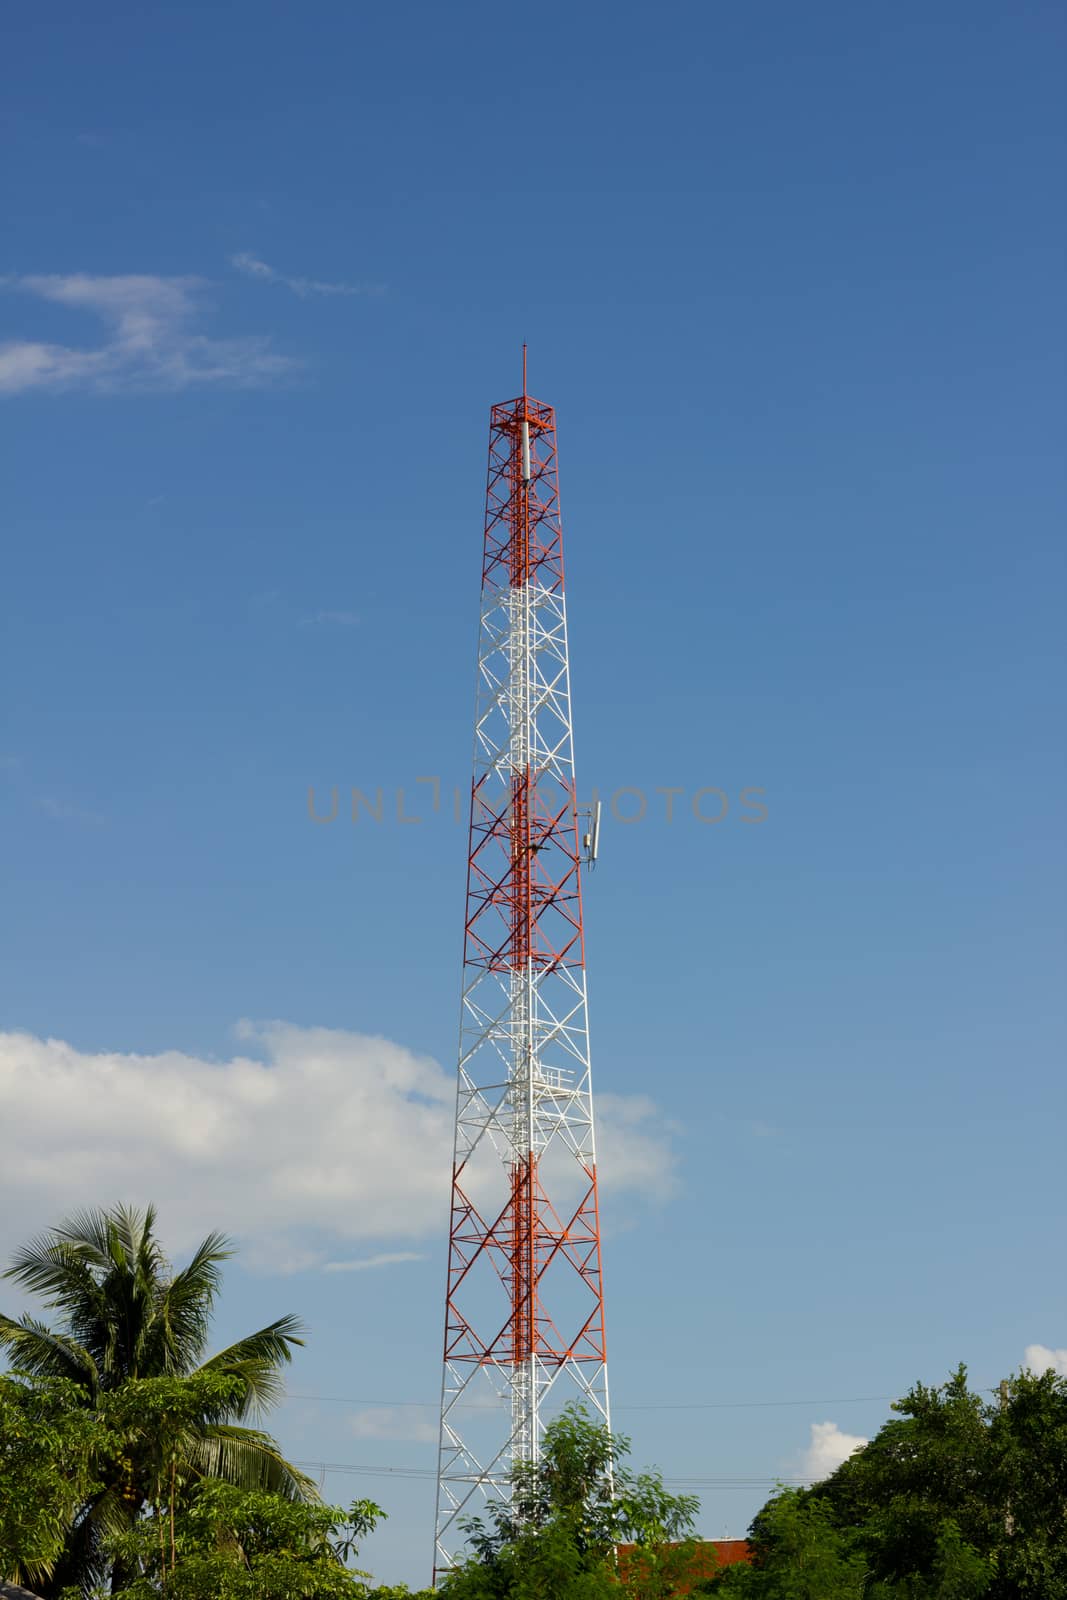 Antenna Tower of Communication, in background of blue sky and cl by a3701027